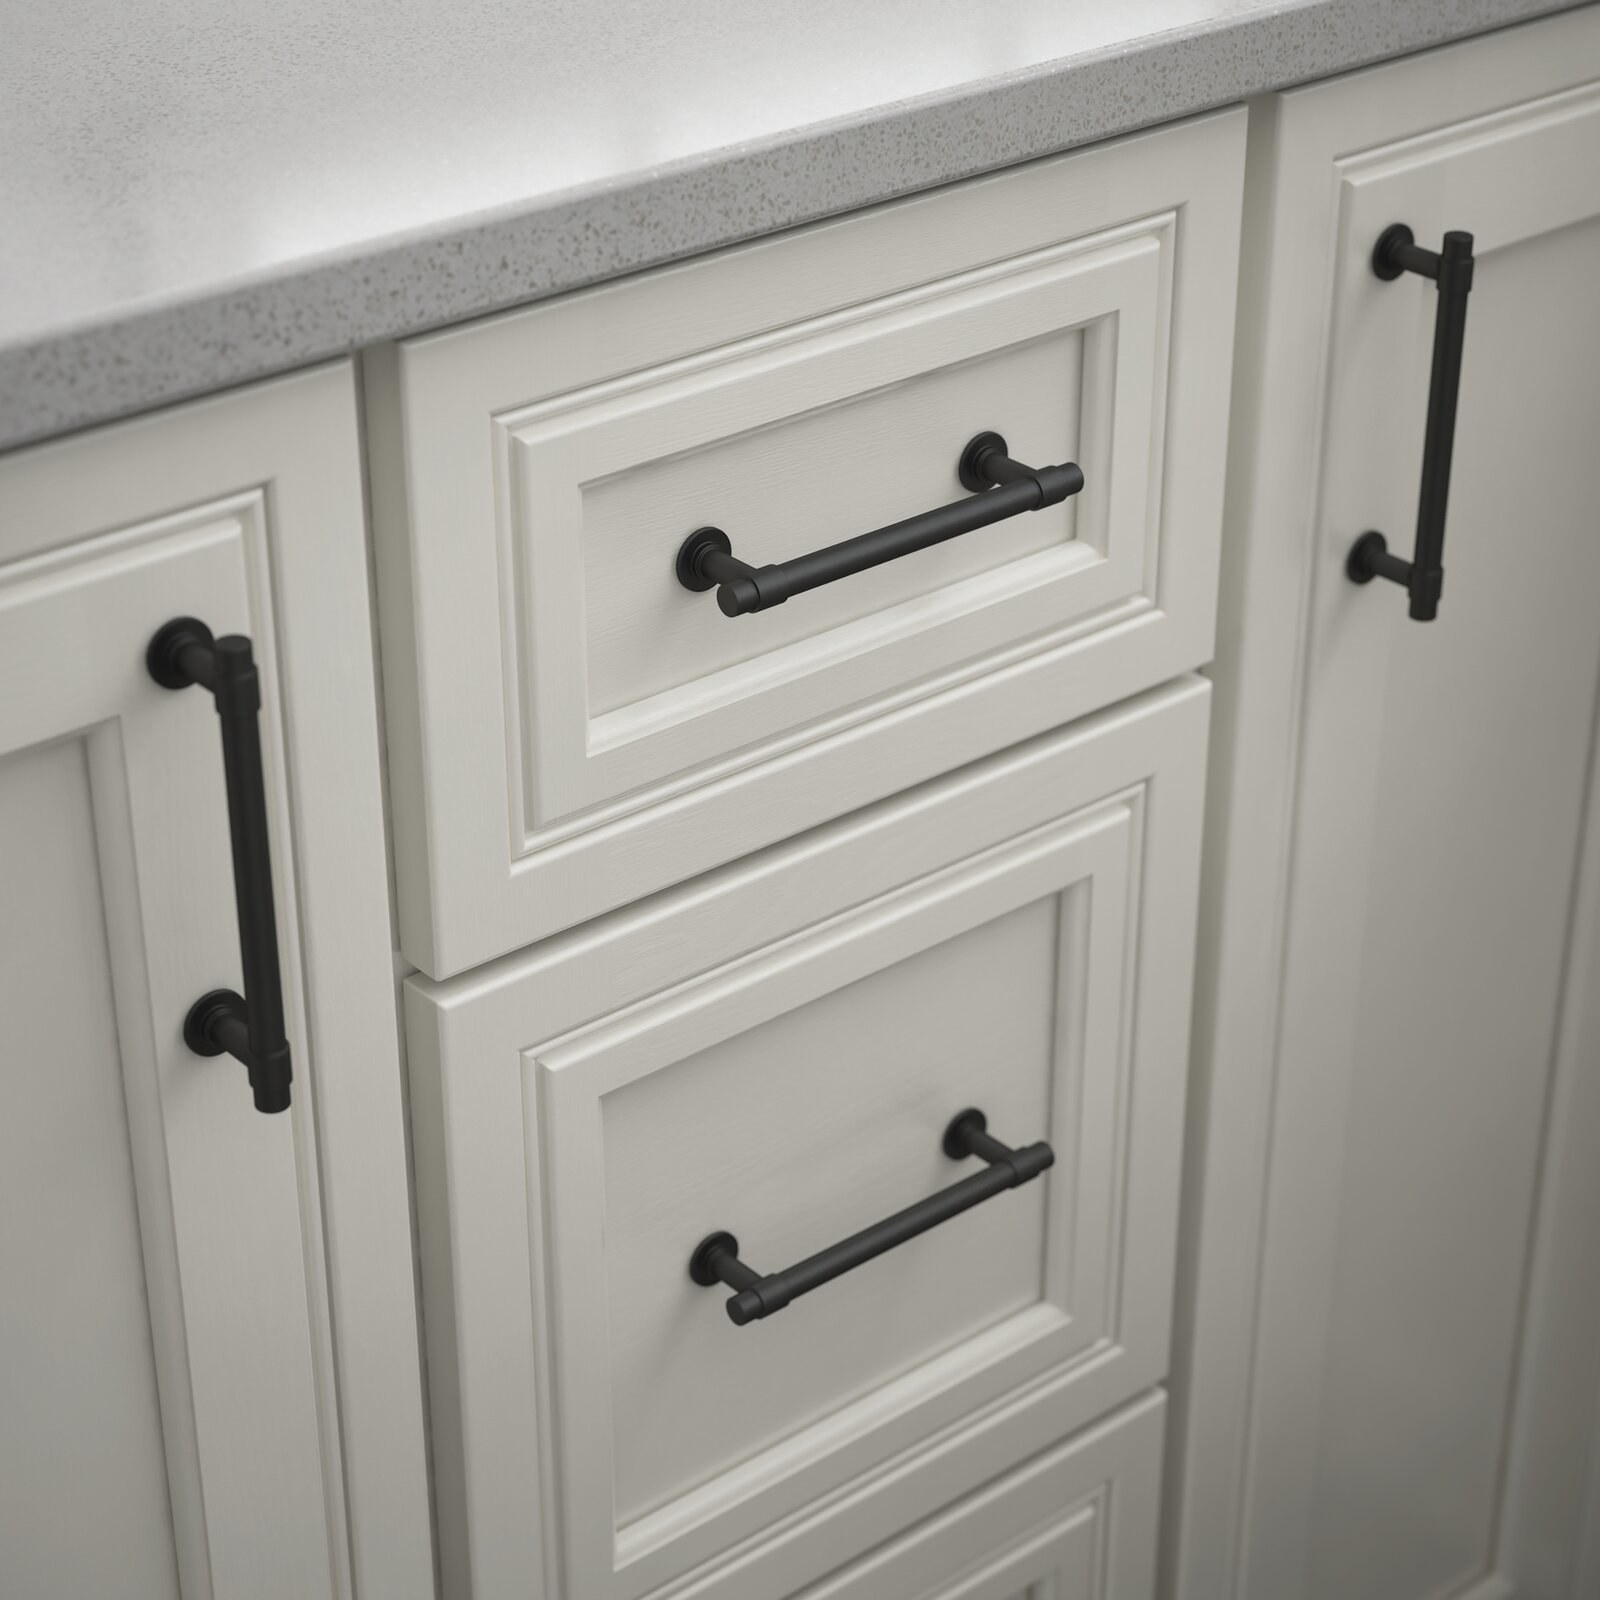 black bar-shaped pulls on white cabinets and drawers